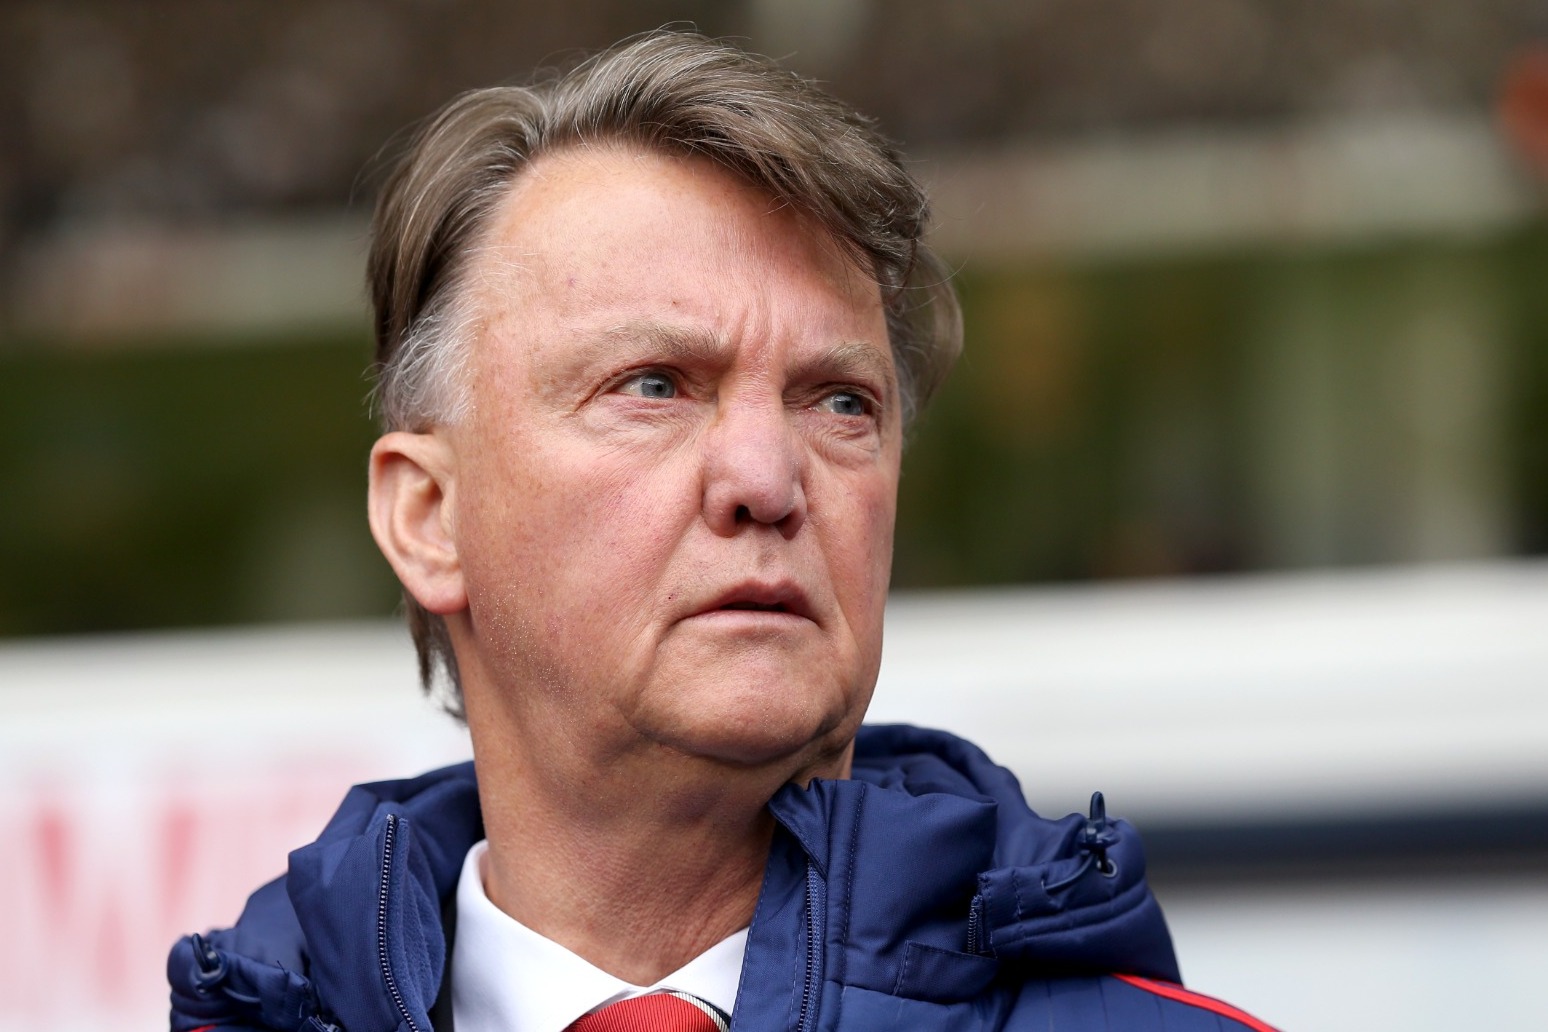 Louis Van Gaal suggests Ed Woodward’s departure from Man Utd could spell success 